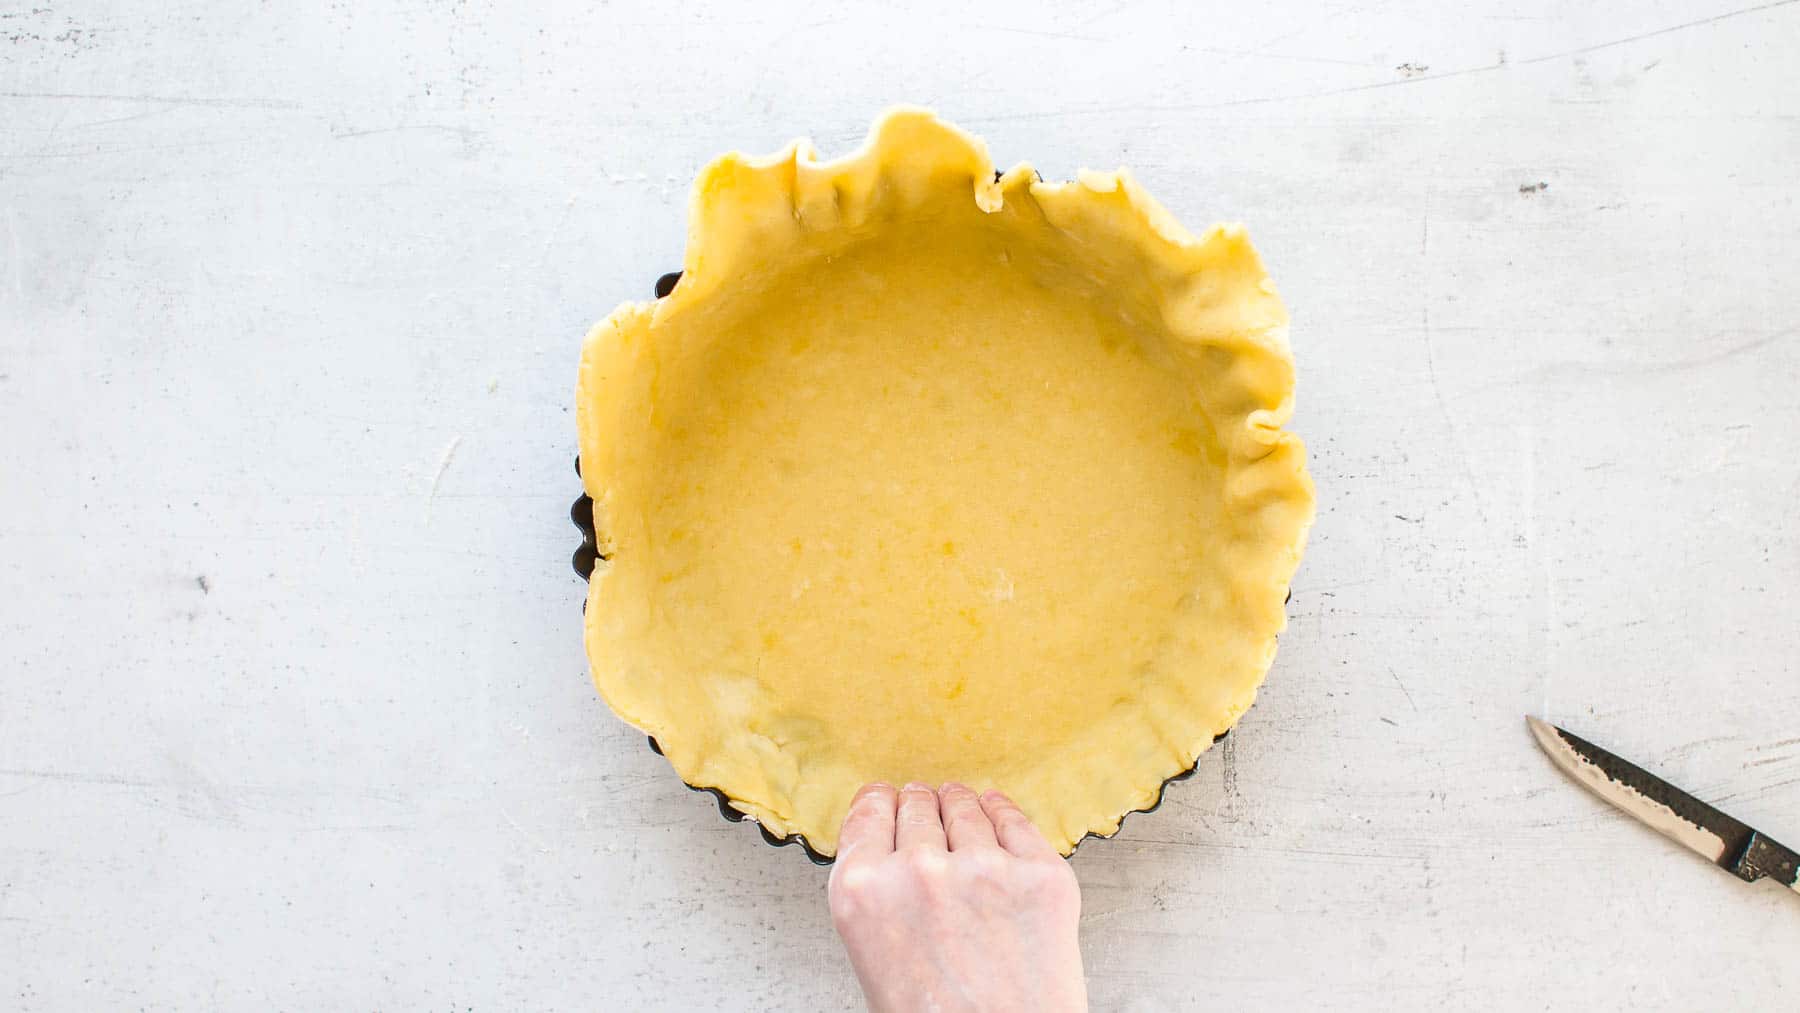 Pressing raw pie crust into a baking pan